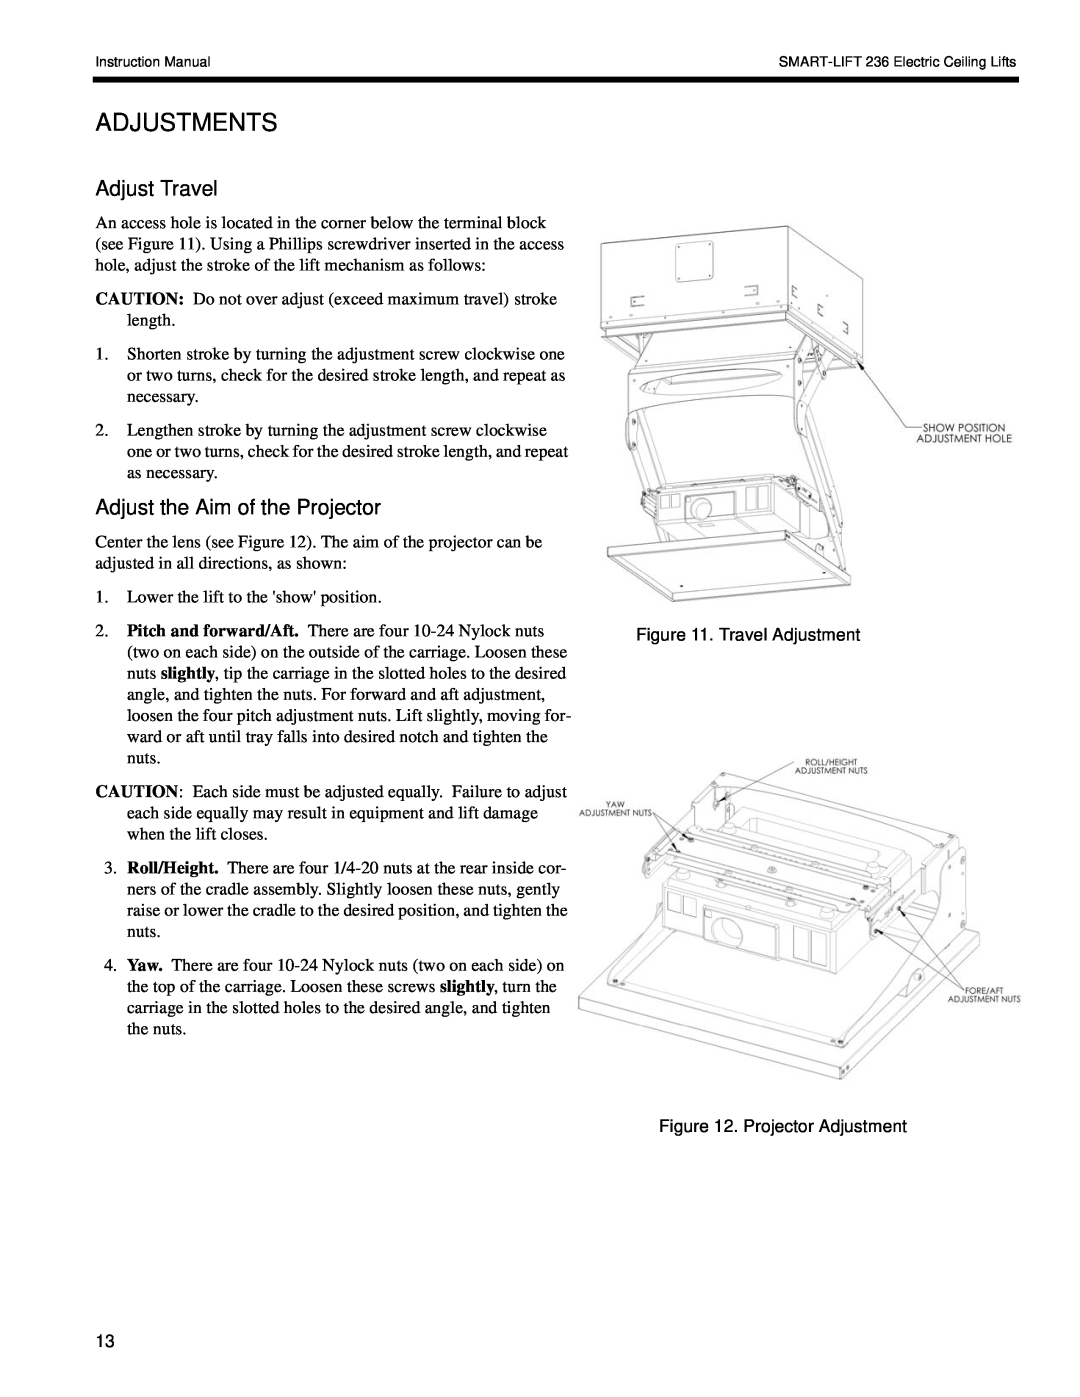 Chief Manufacturing SL-236 installation instructions Adjustments, Adjust Travel, Adjust the Aim of the Projector 